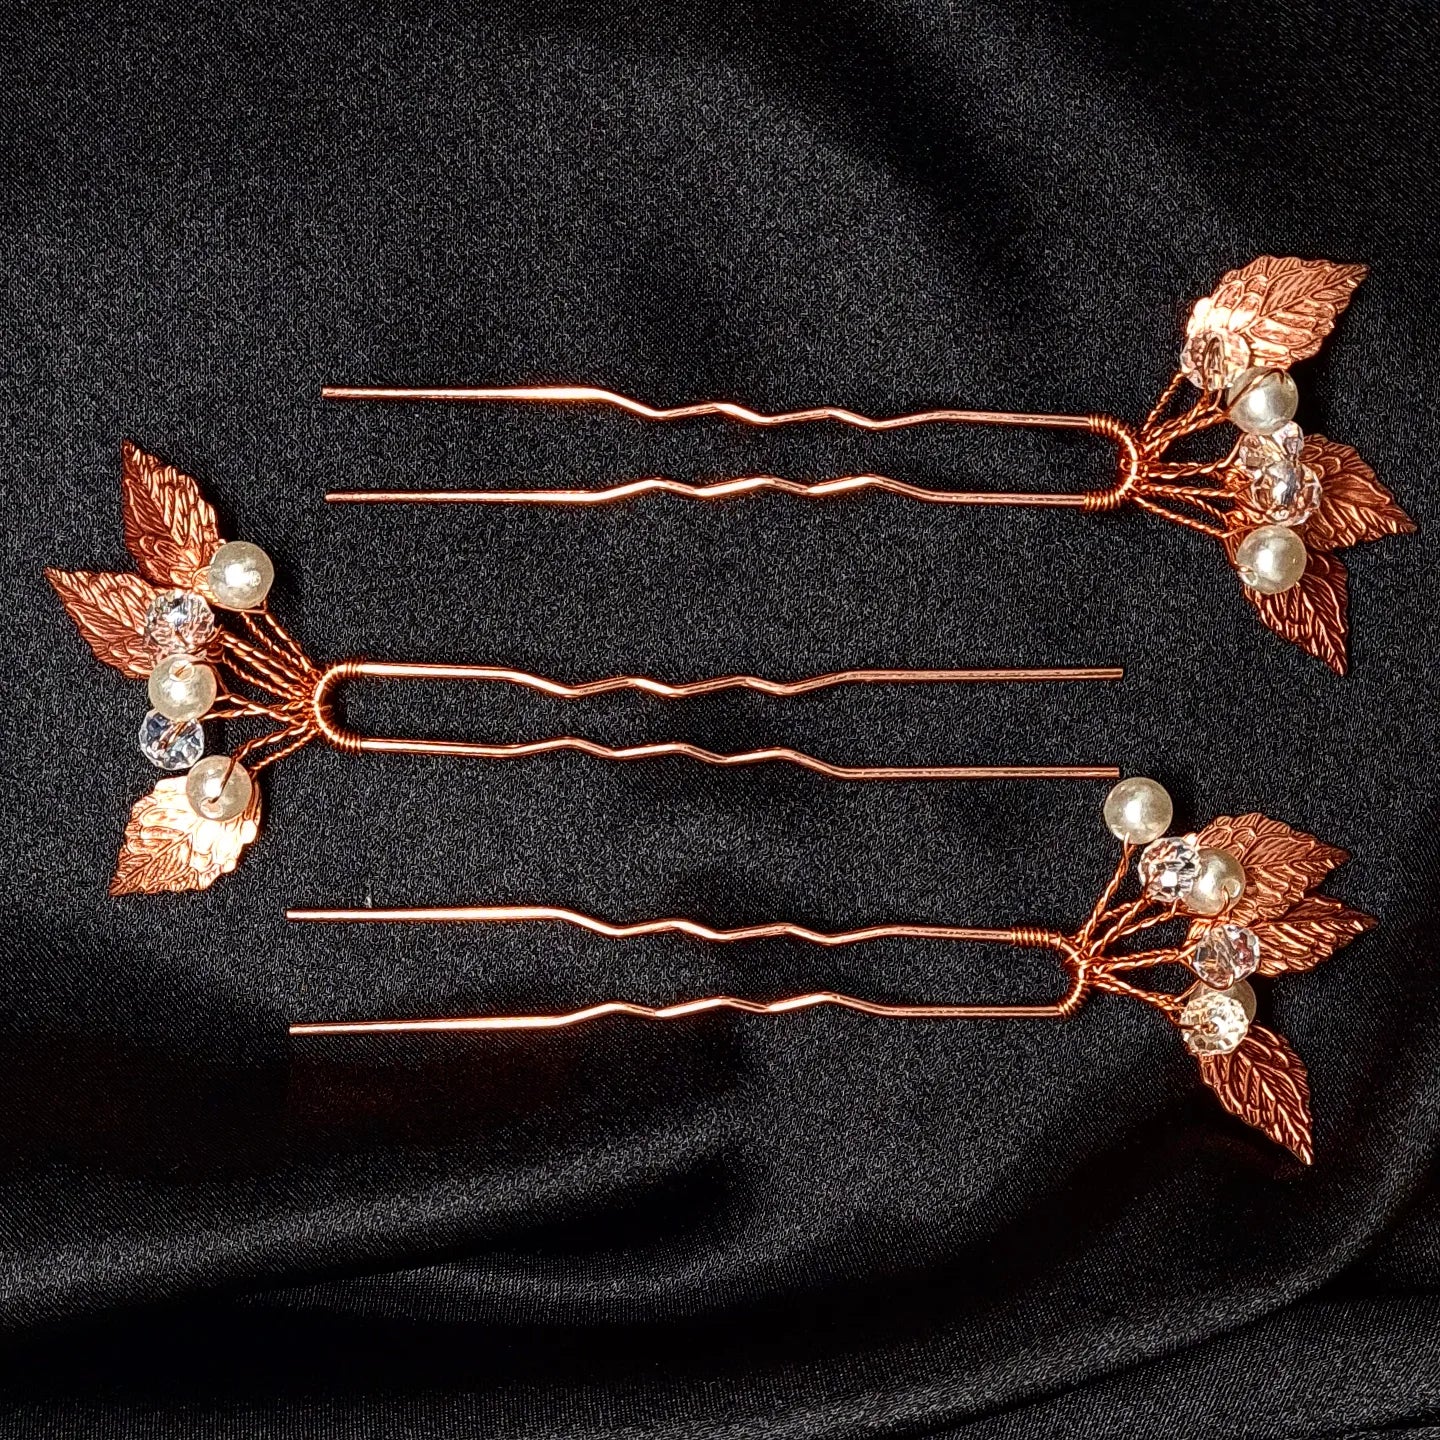 a set of three hair pins with leaves and pearls. The hair pins are made of copper and have pearls and leaves on them. The hair pins are in rose gold color.